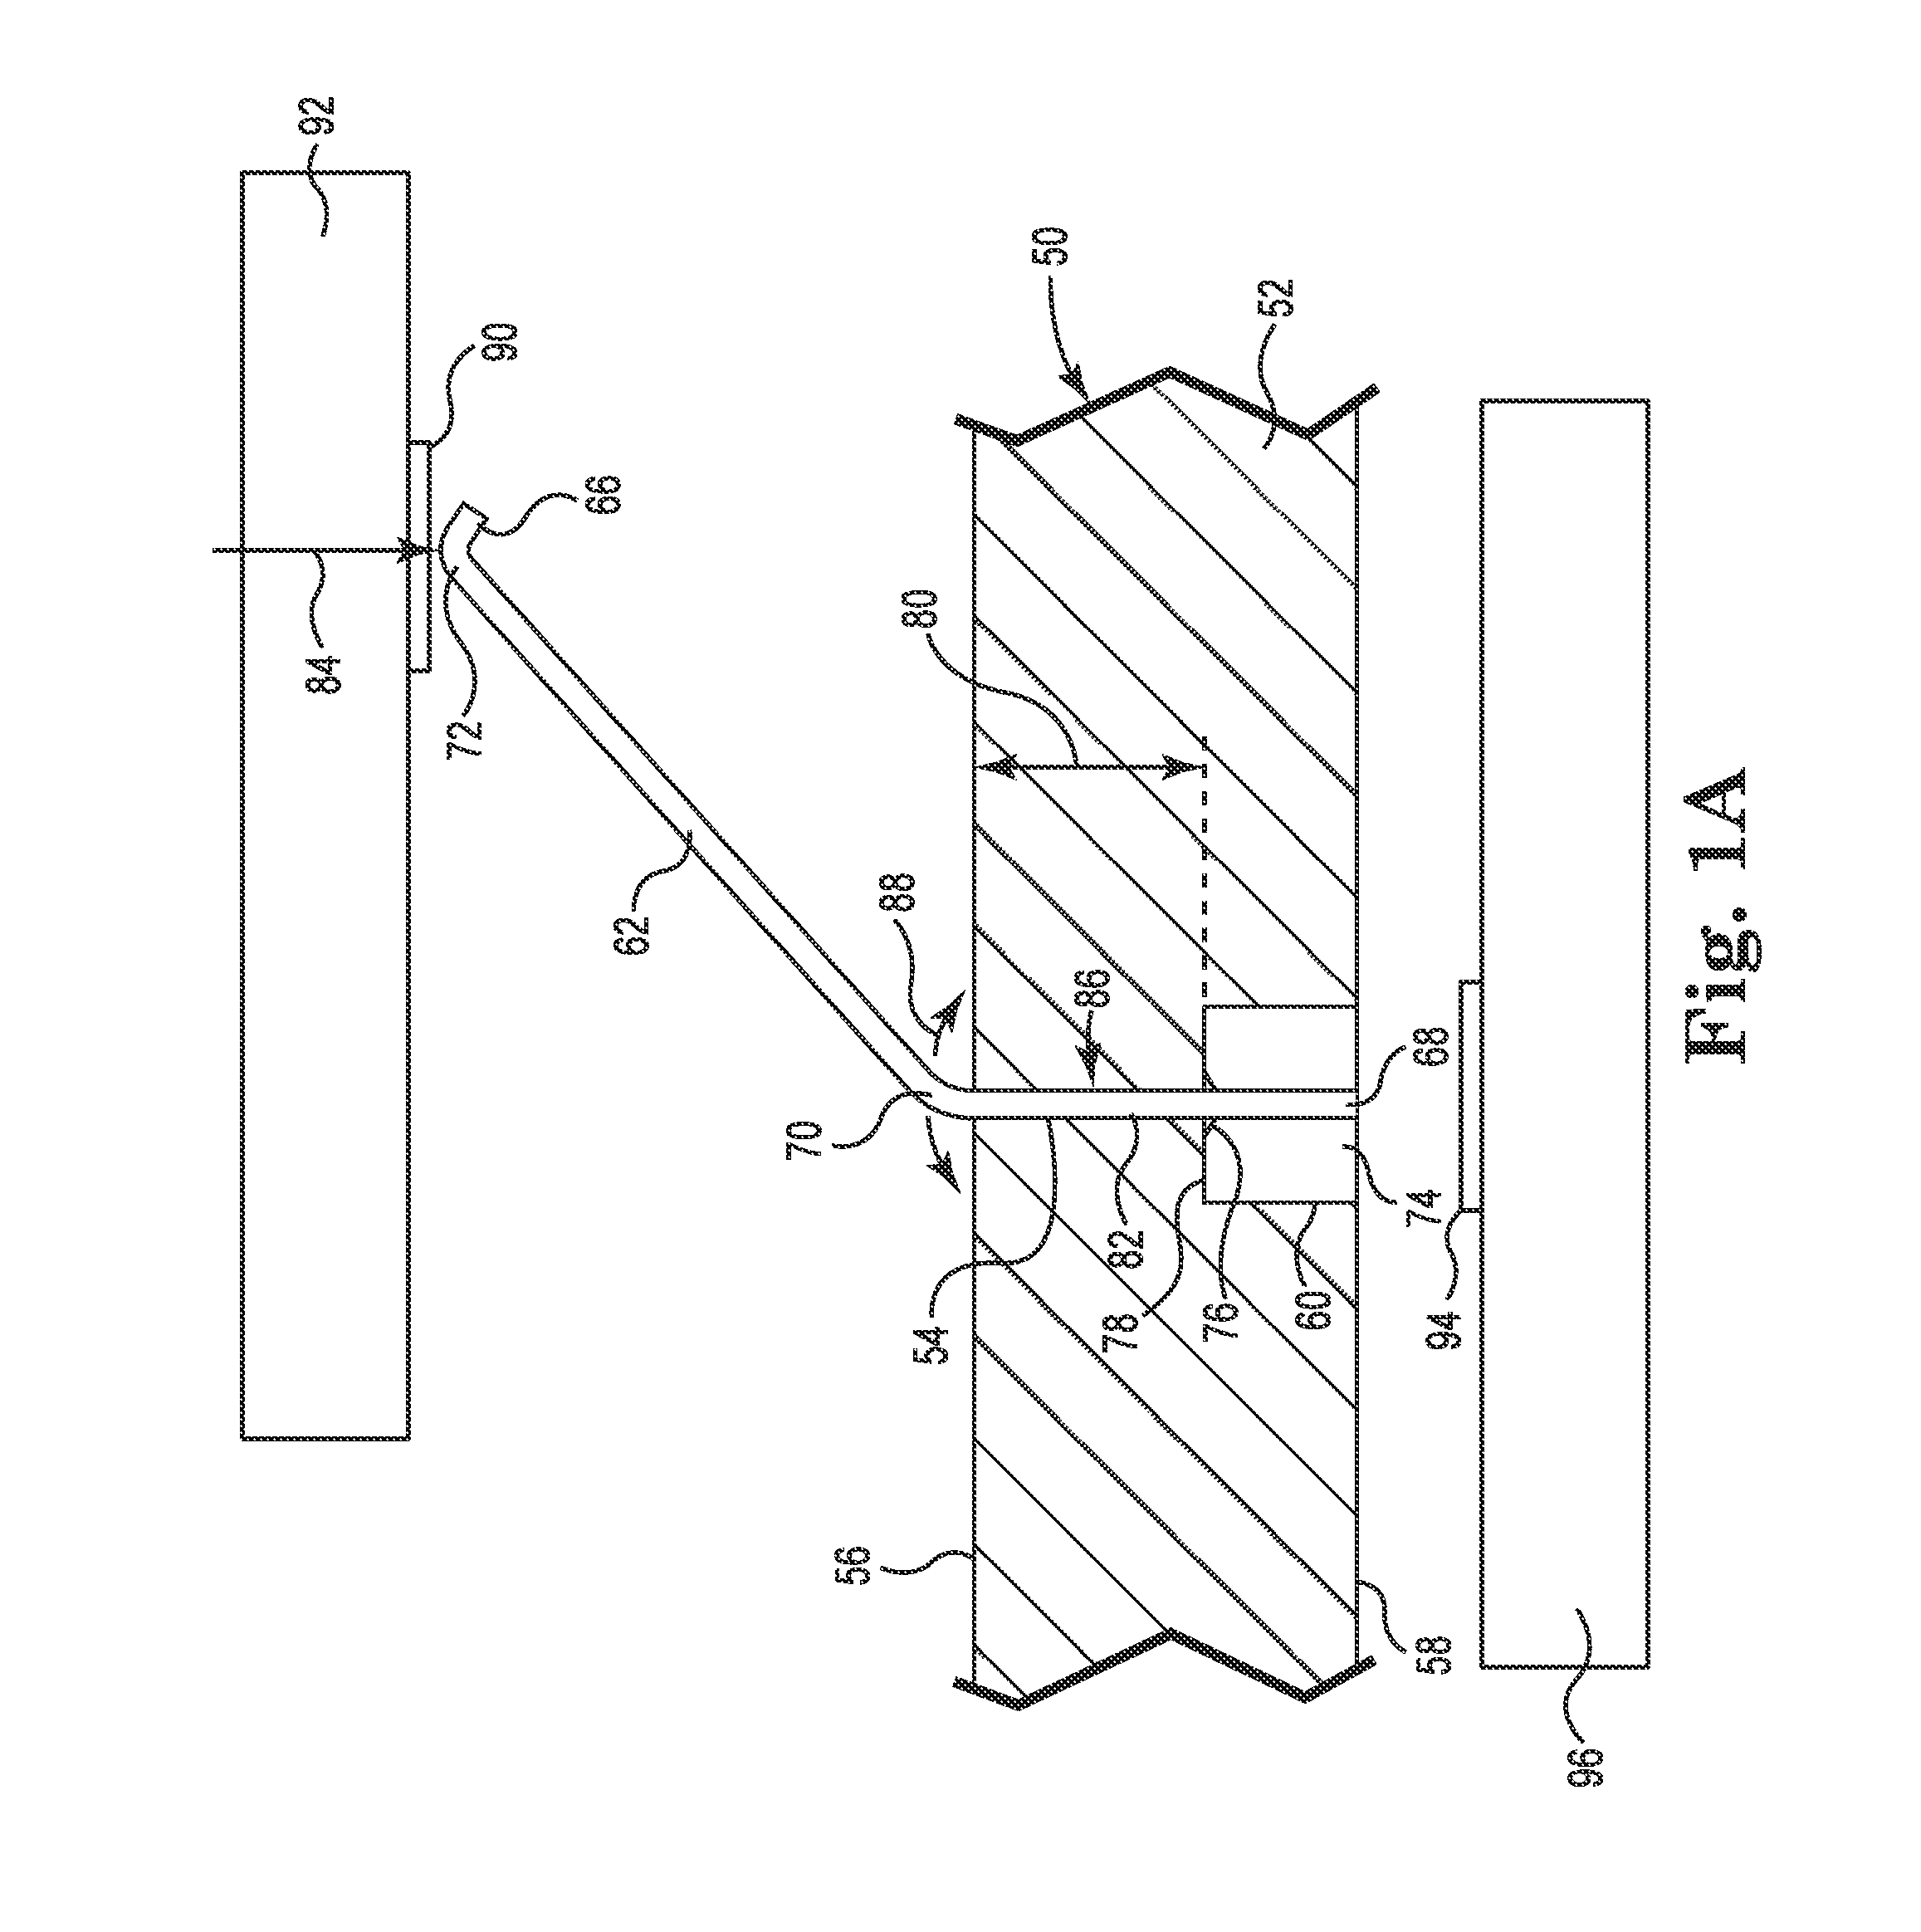 High performance surface mount electrical interconnect